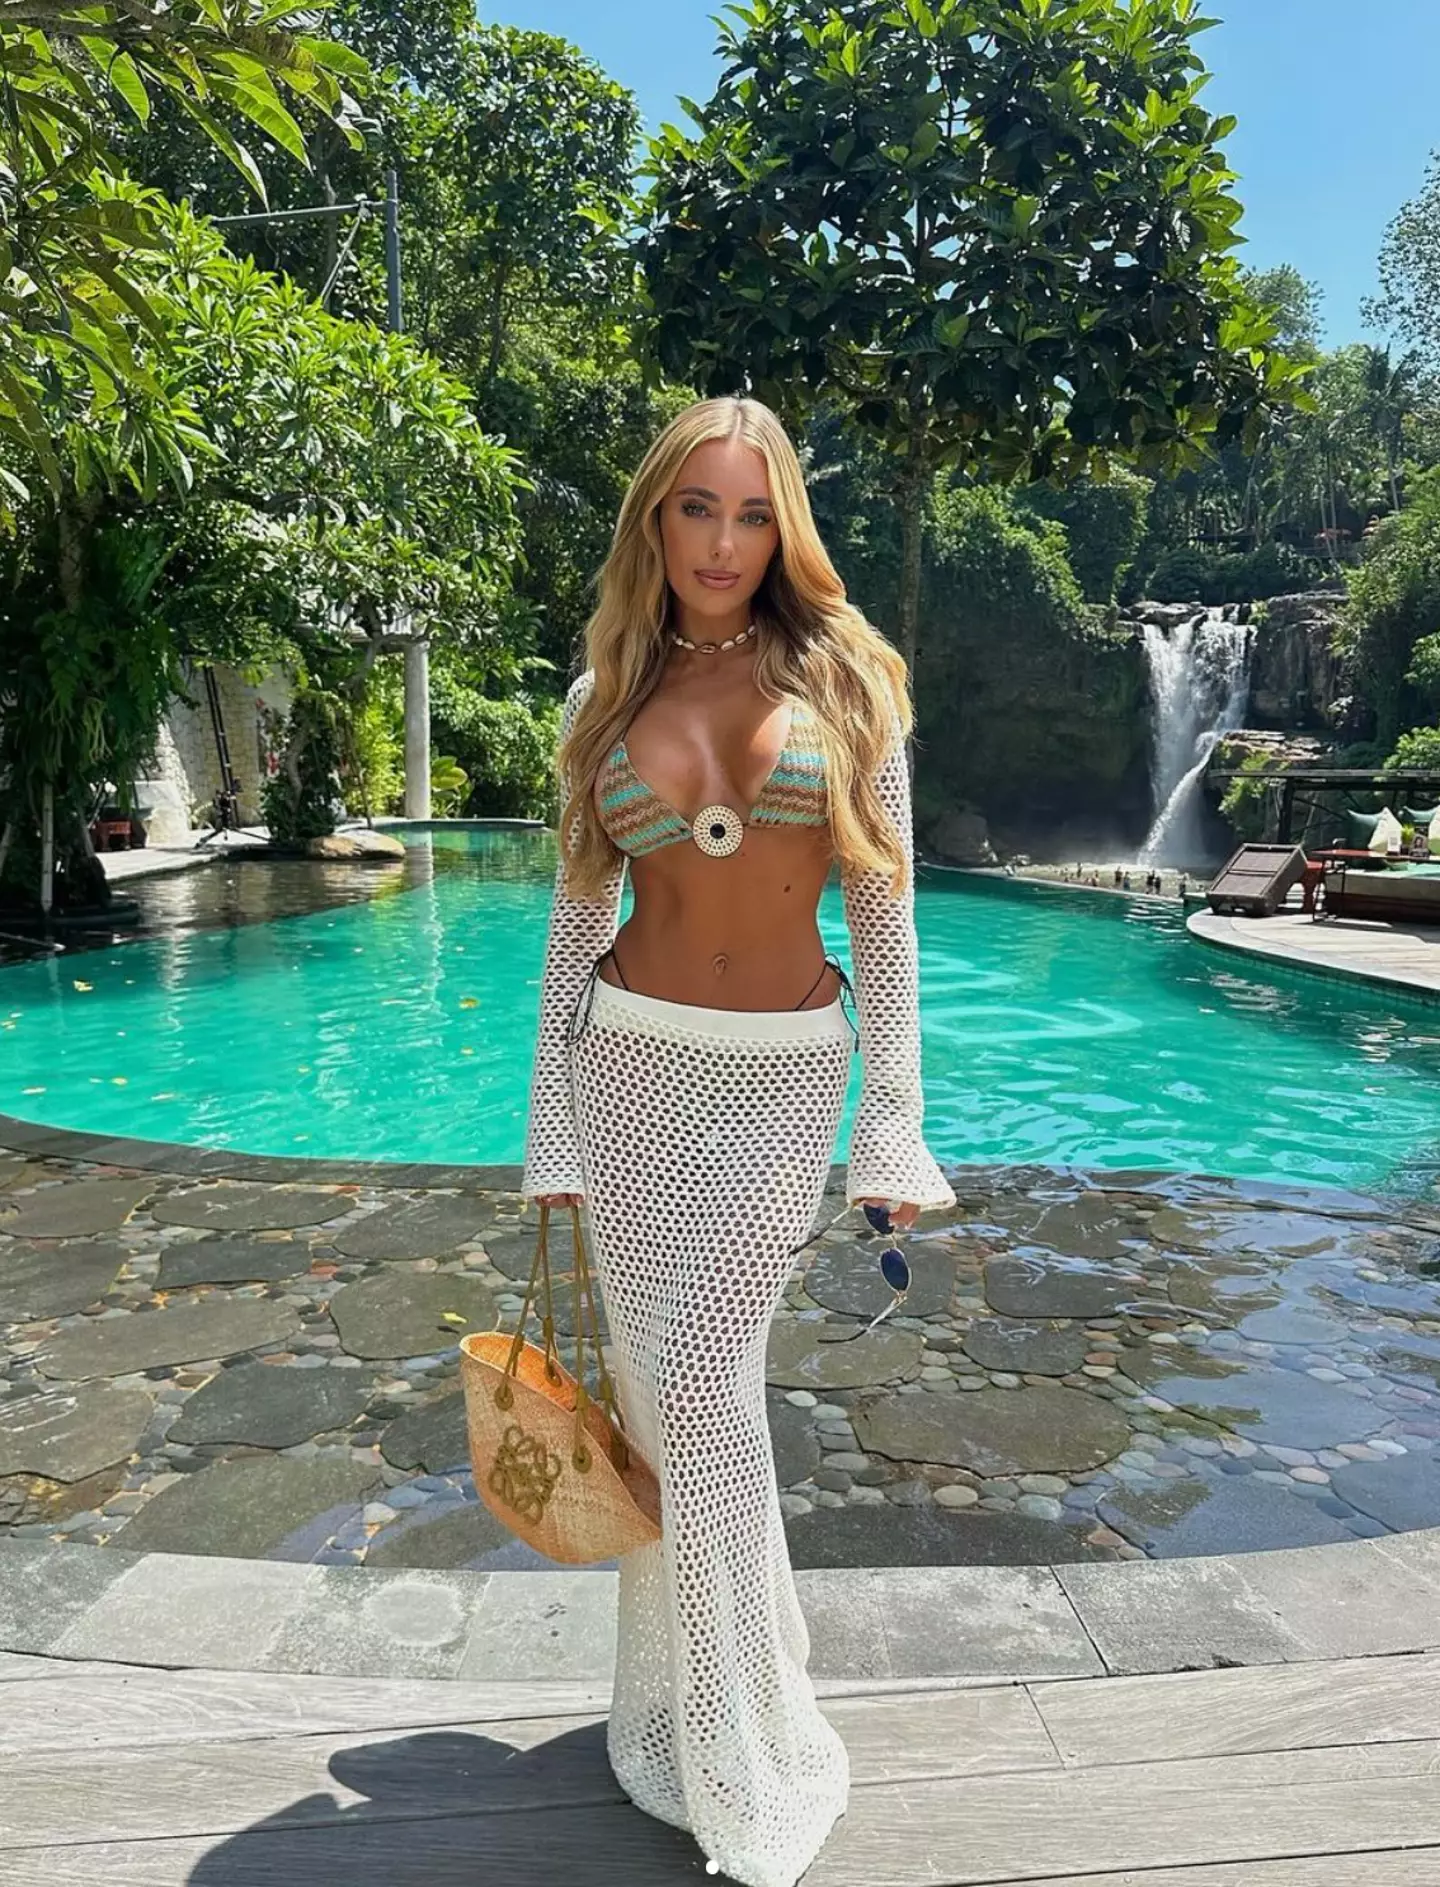 The TOWIE beauty has been filming in Bali.